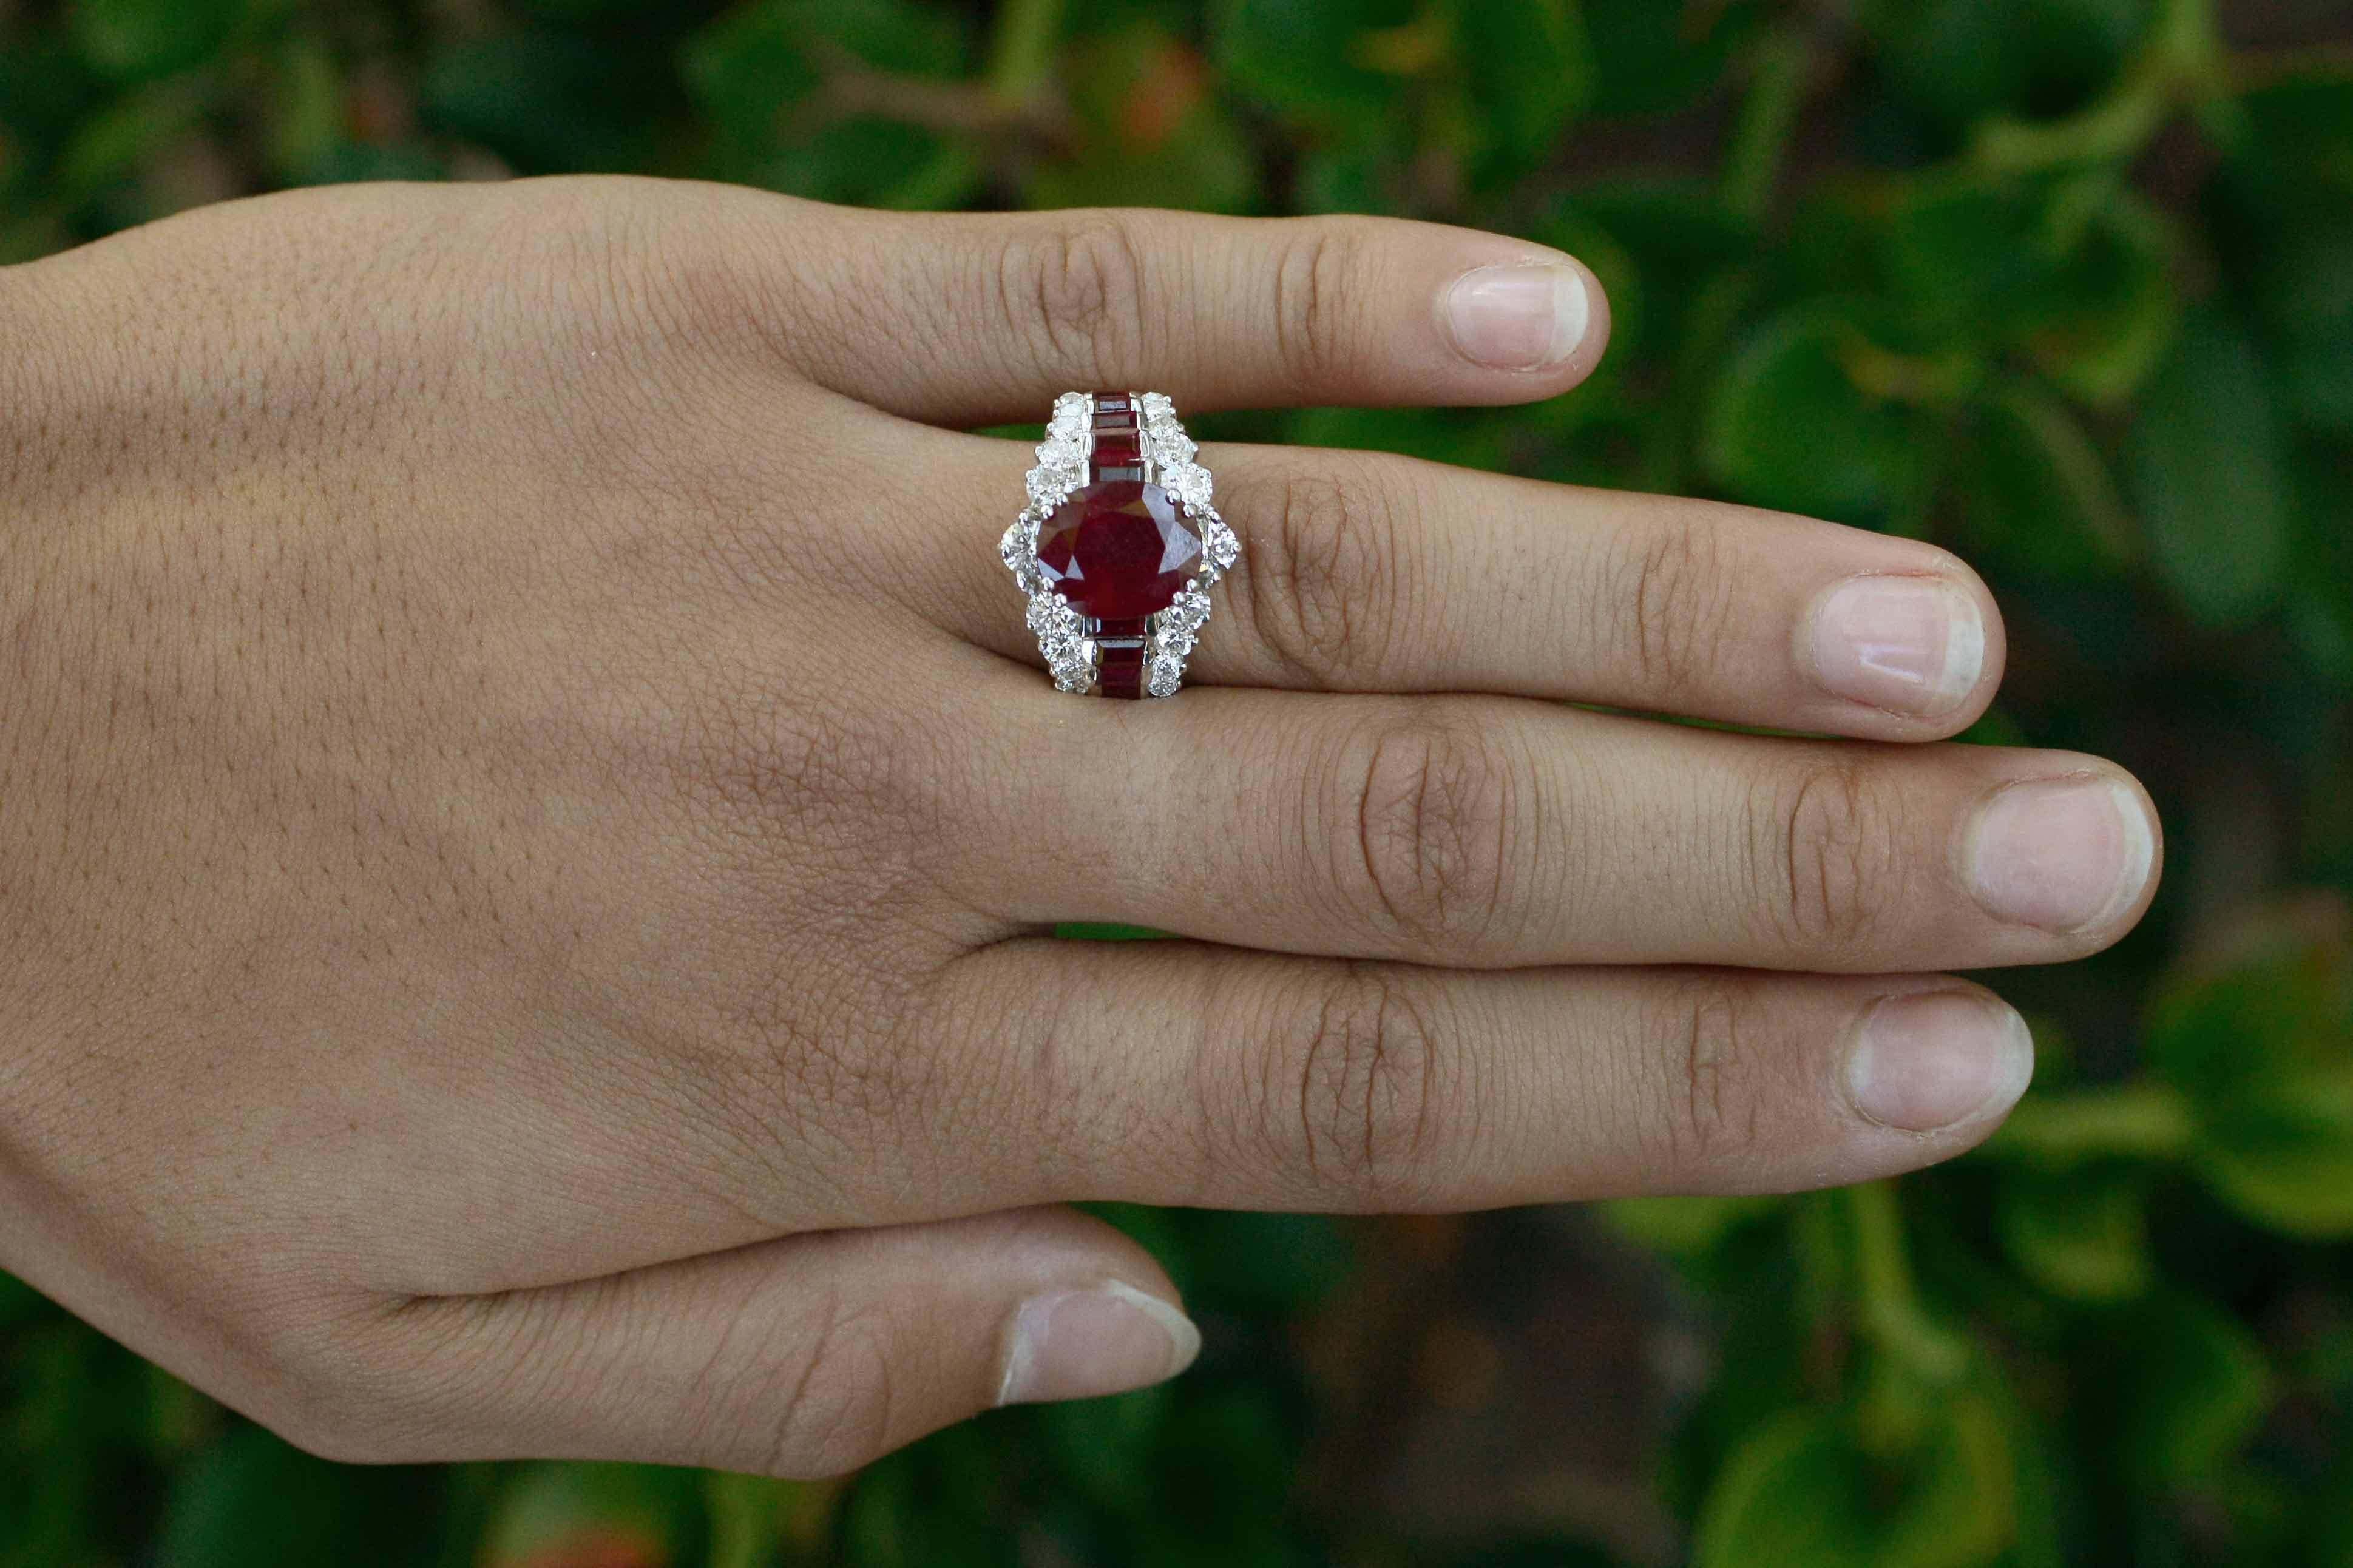 This captivating cocktail ring commands attention, centered by a luscious red ruby of 5.27 cts, the wide band cascades down the finger with a staircase of baguette rubies and sparkling round diamonds. This bauble would make for a glam gemstone